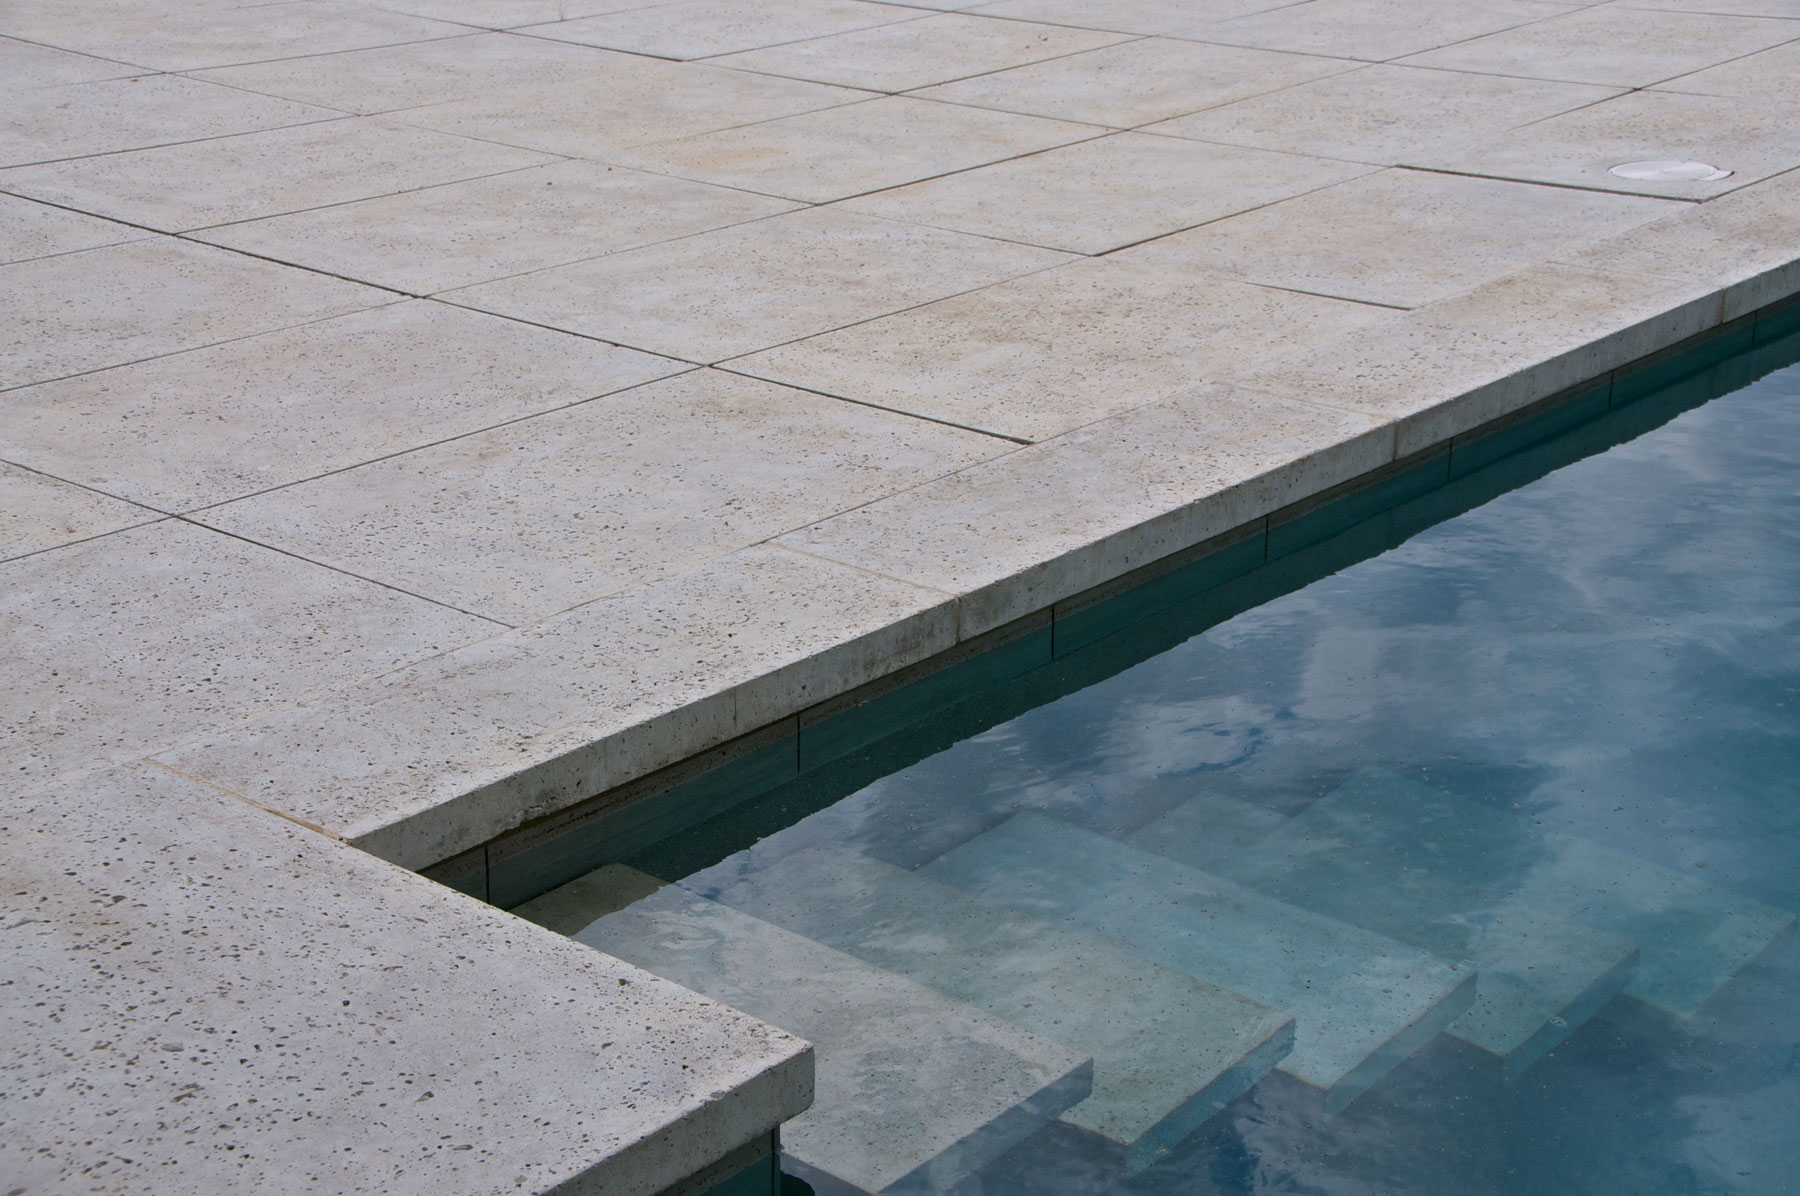 The pool deck pavers transition seamlessly into the inground pool steps